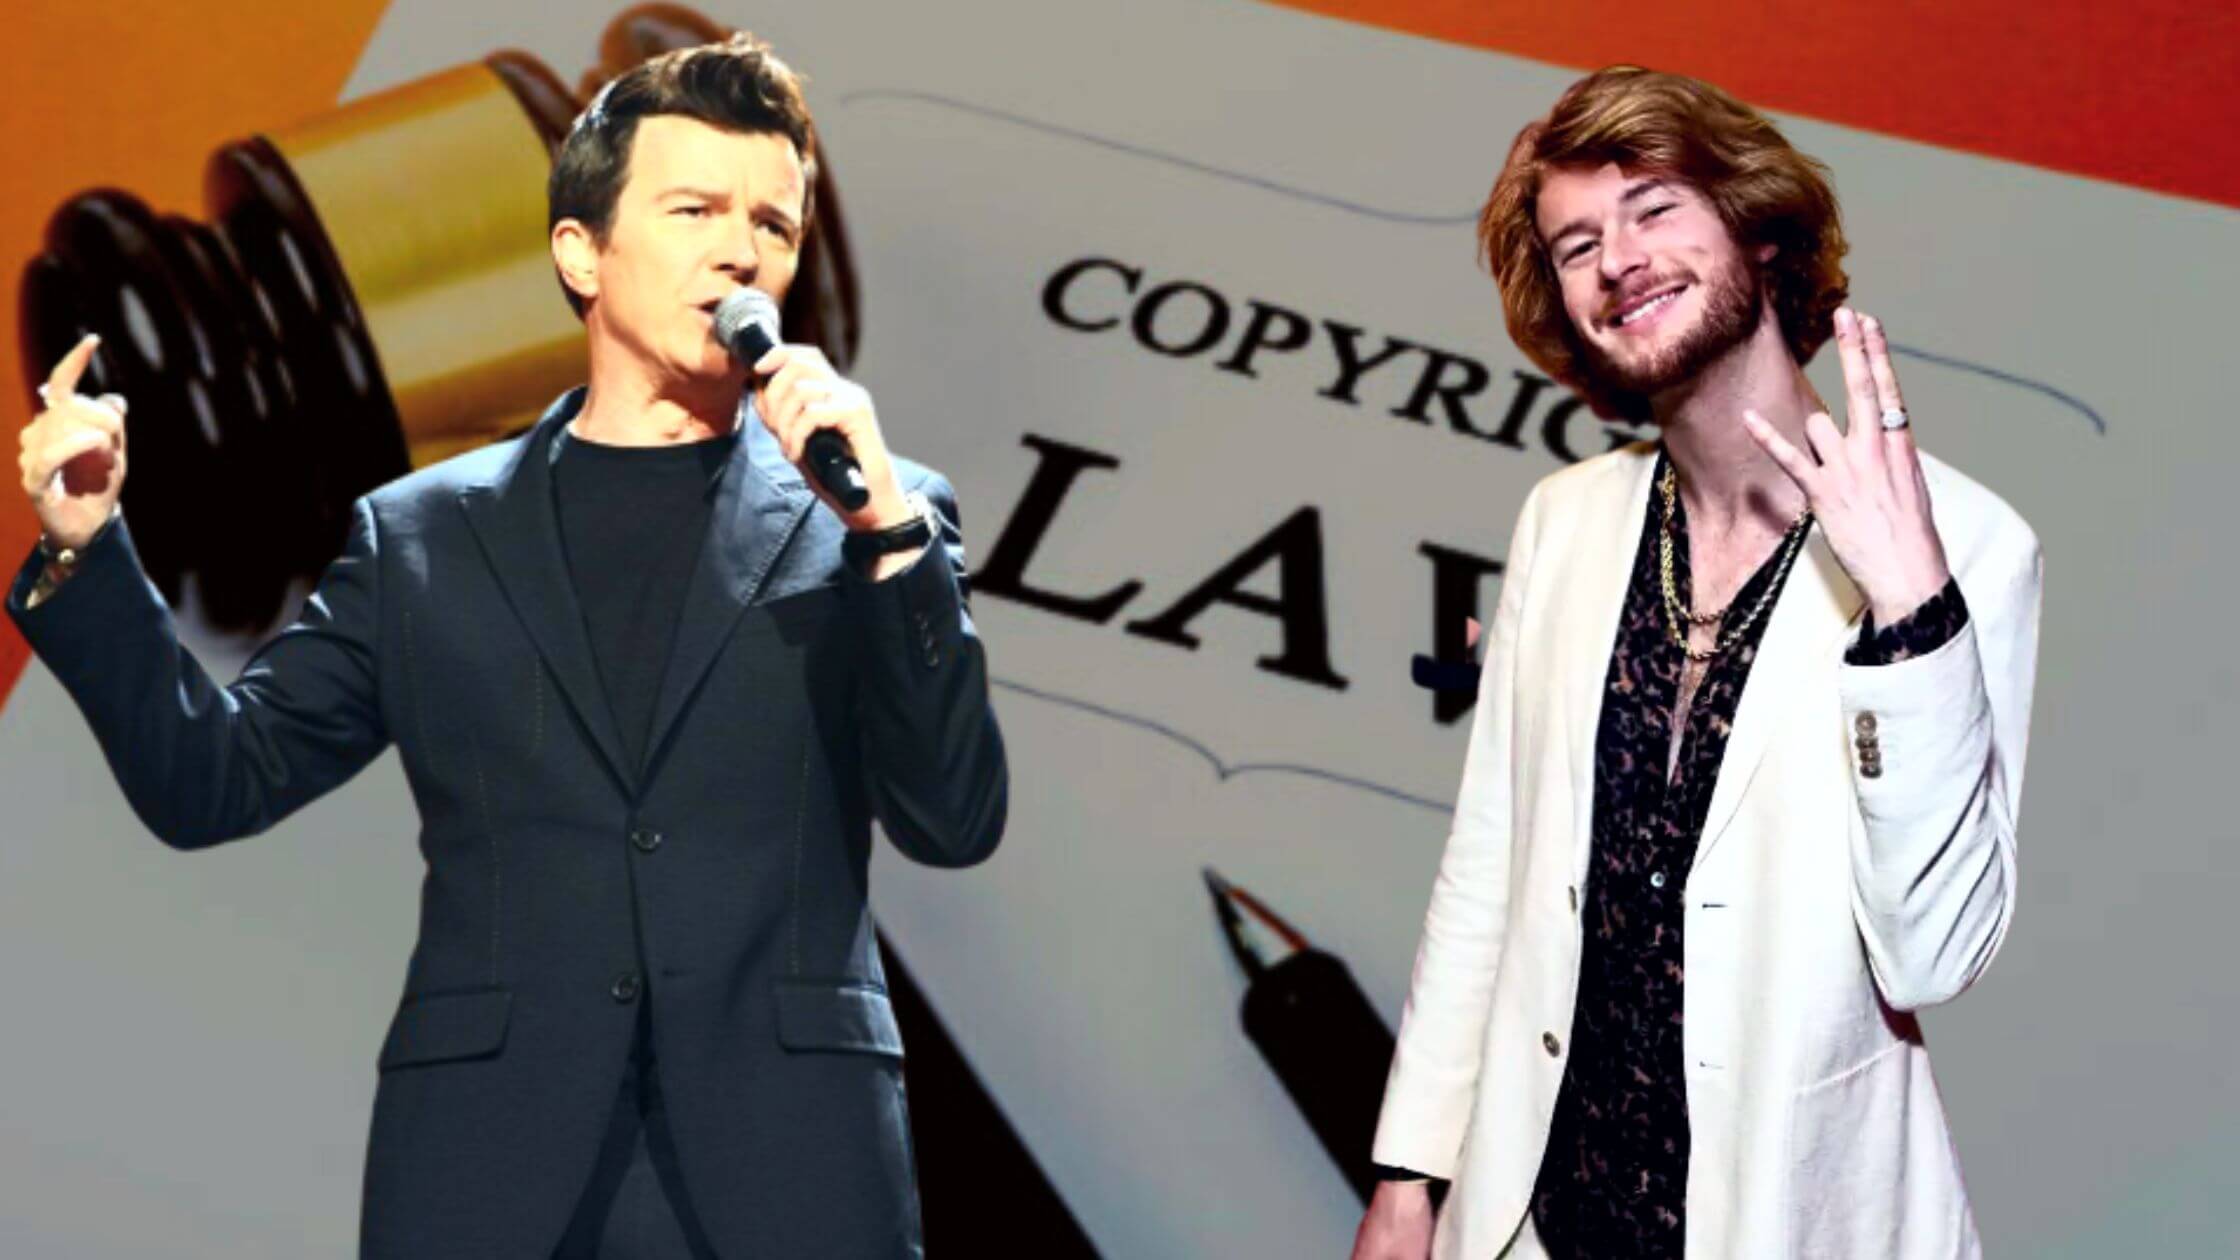 Rick Astley Files Copyright Lawsuit Against Rapper Yung Gravy Over Voice Imitation